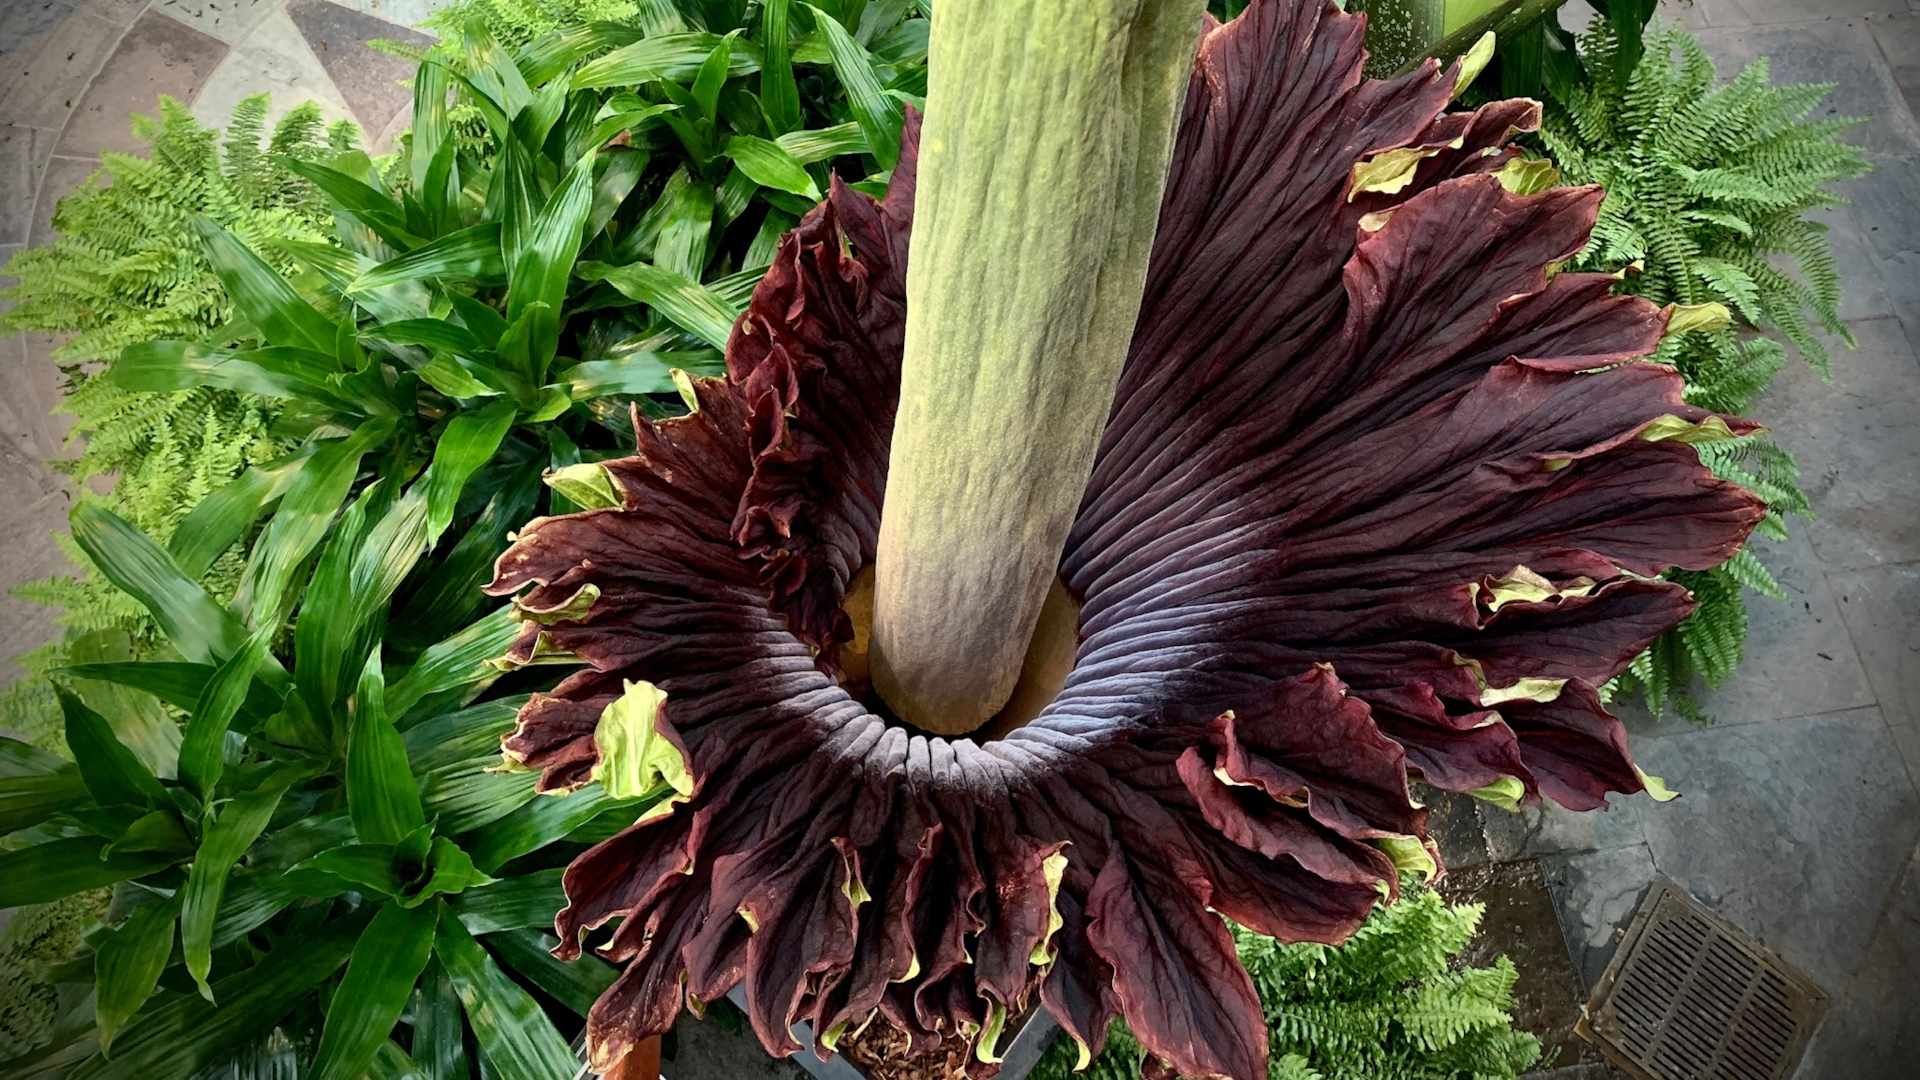 Due to a shallow genetic pool, corpse flowers in botanic gardens and in the wild are at risk of being wiped out. Scientists are working together to conserve this unforgettable species.